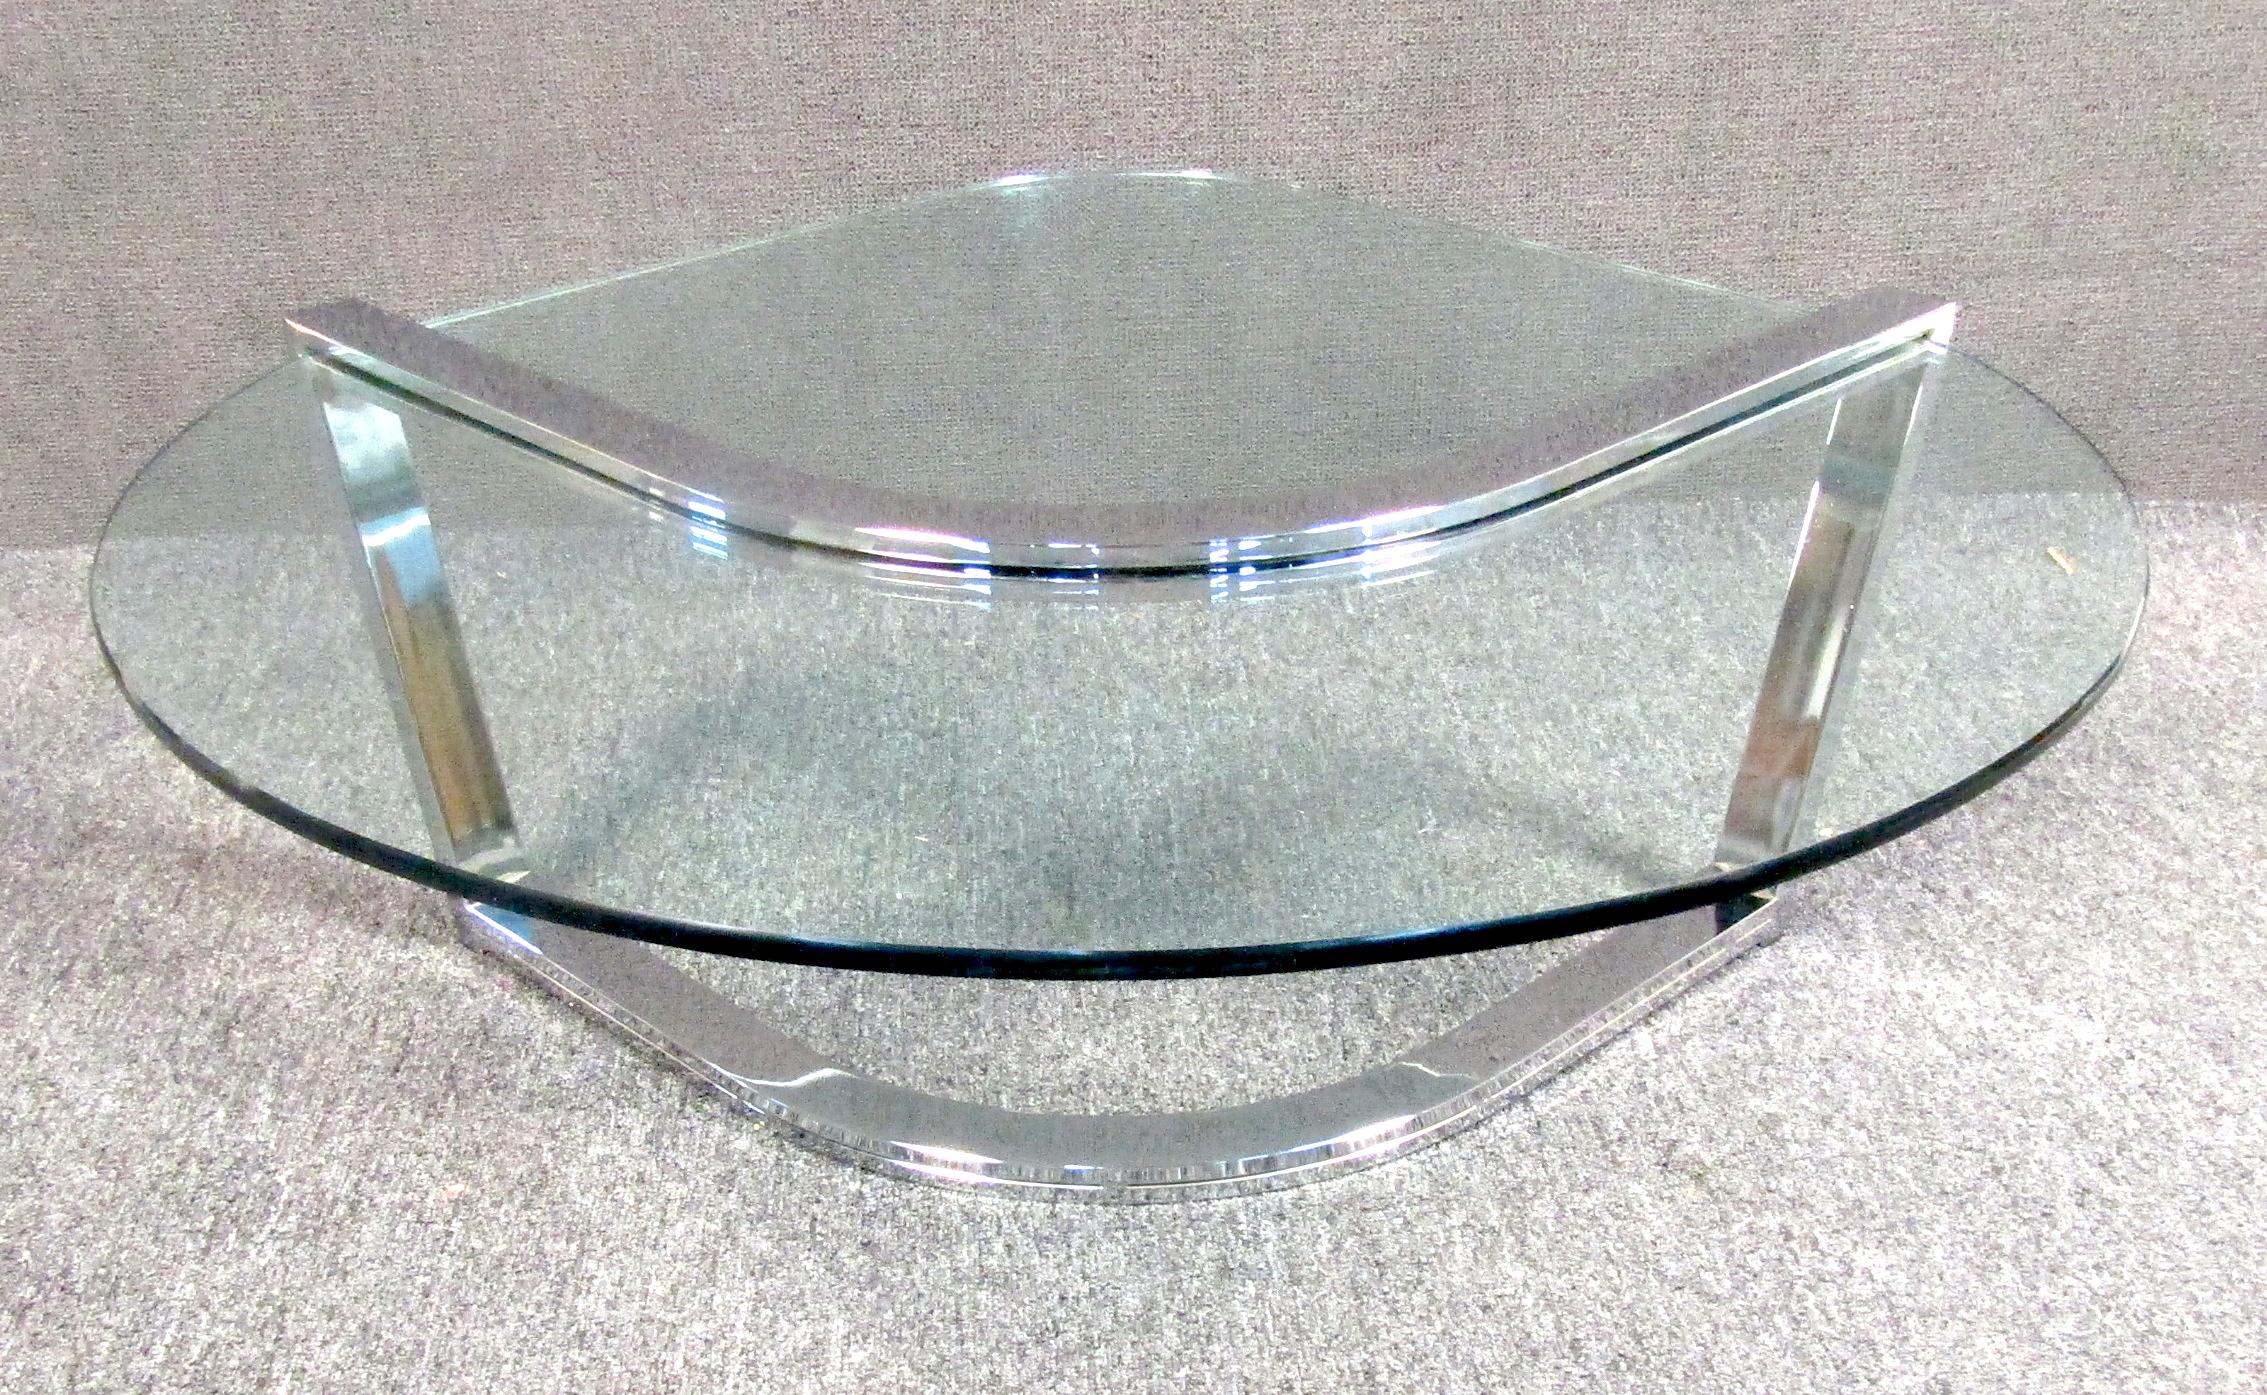 Sleek mid-century modern glass and chrome coffee table by Pace, featuring a teardrop designed glass top.

Please confirm item location (NY or NJ).